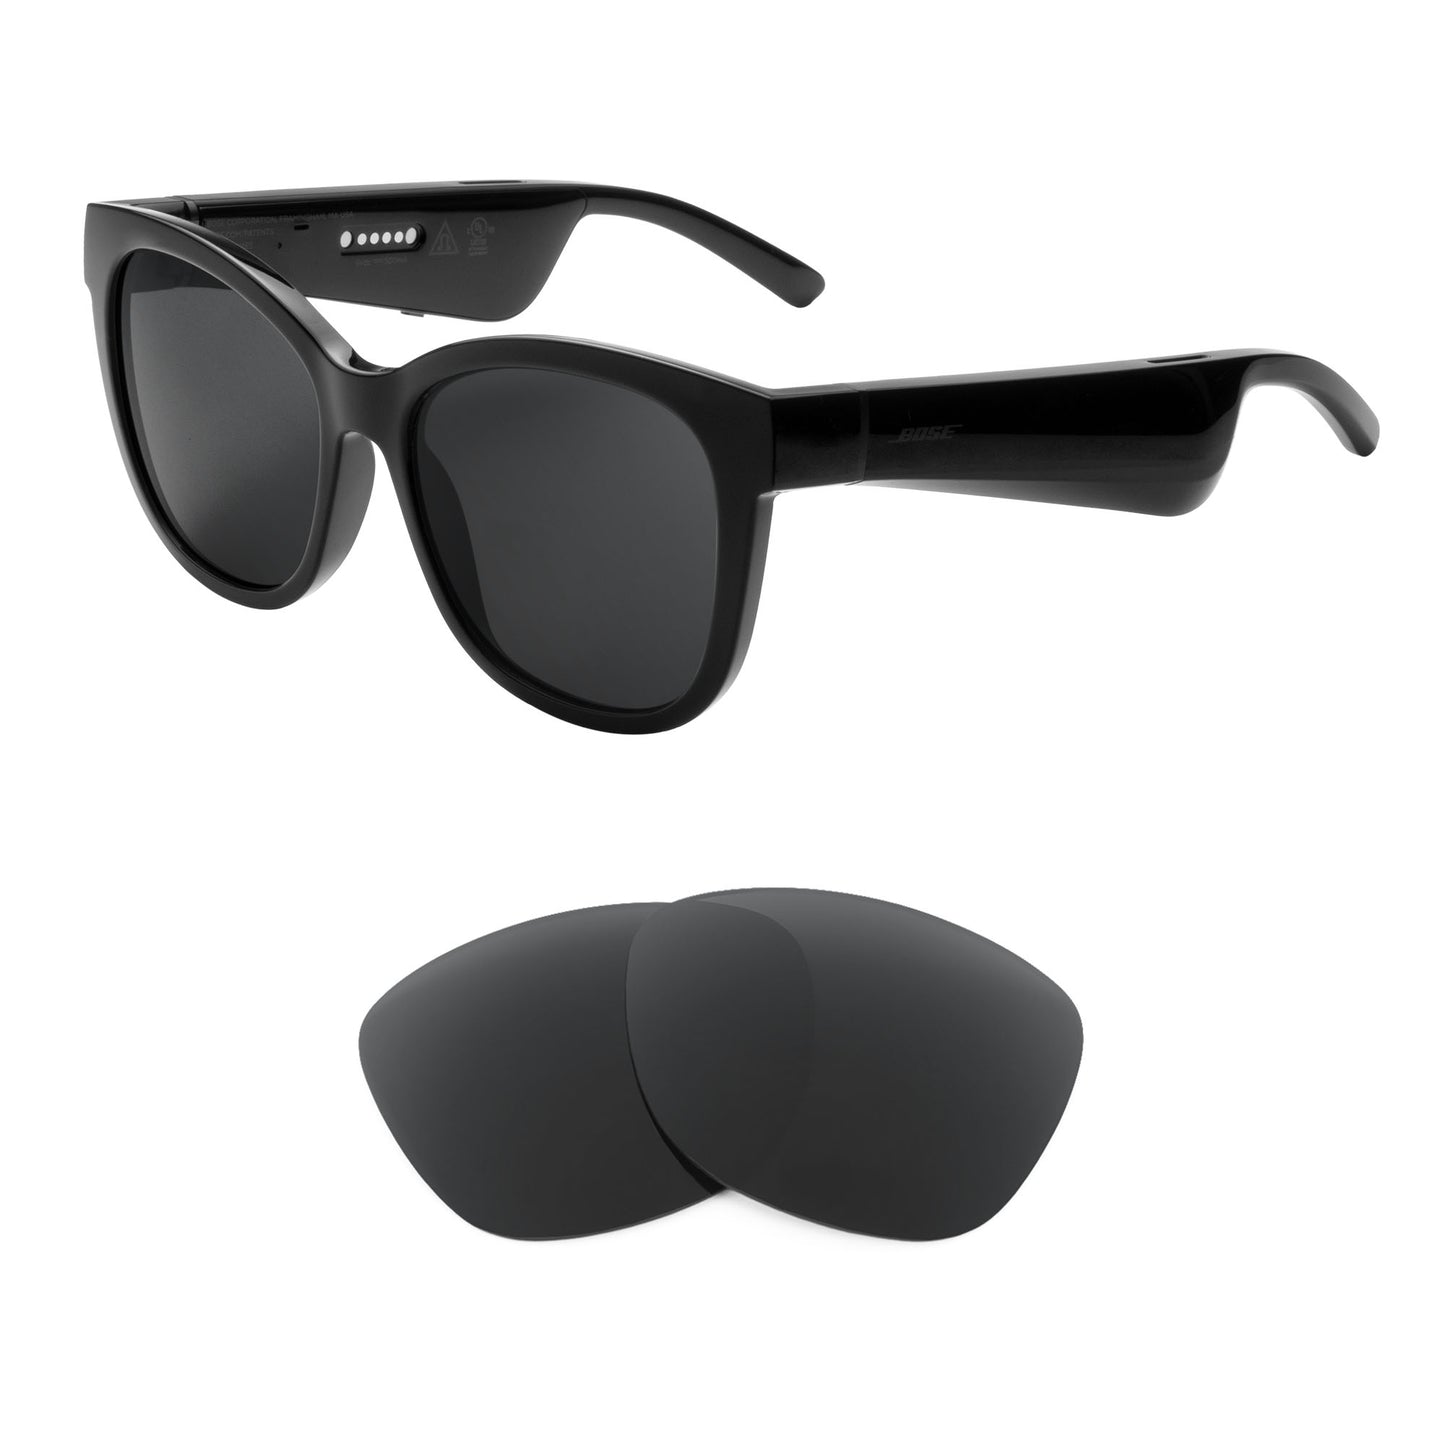 Bose Soprano sunglasses with replacement lenses